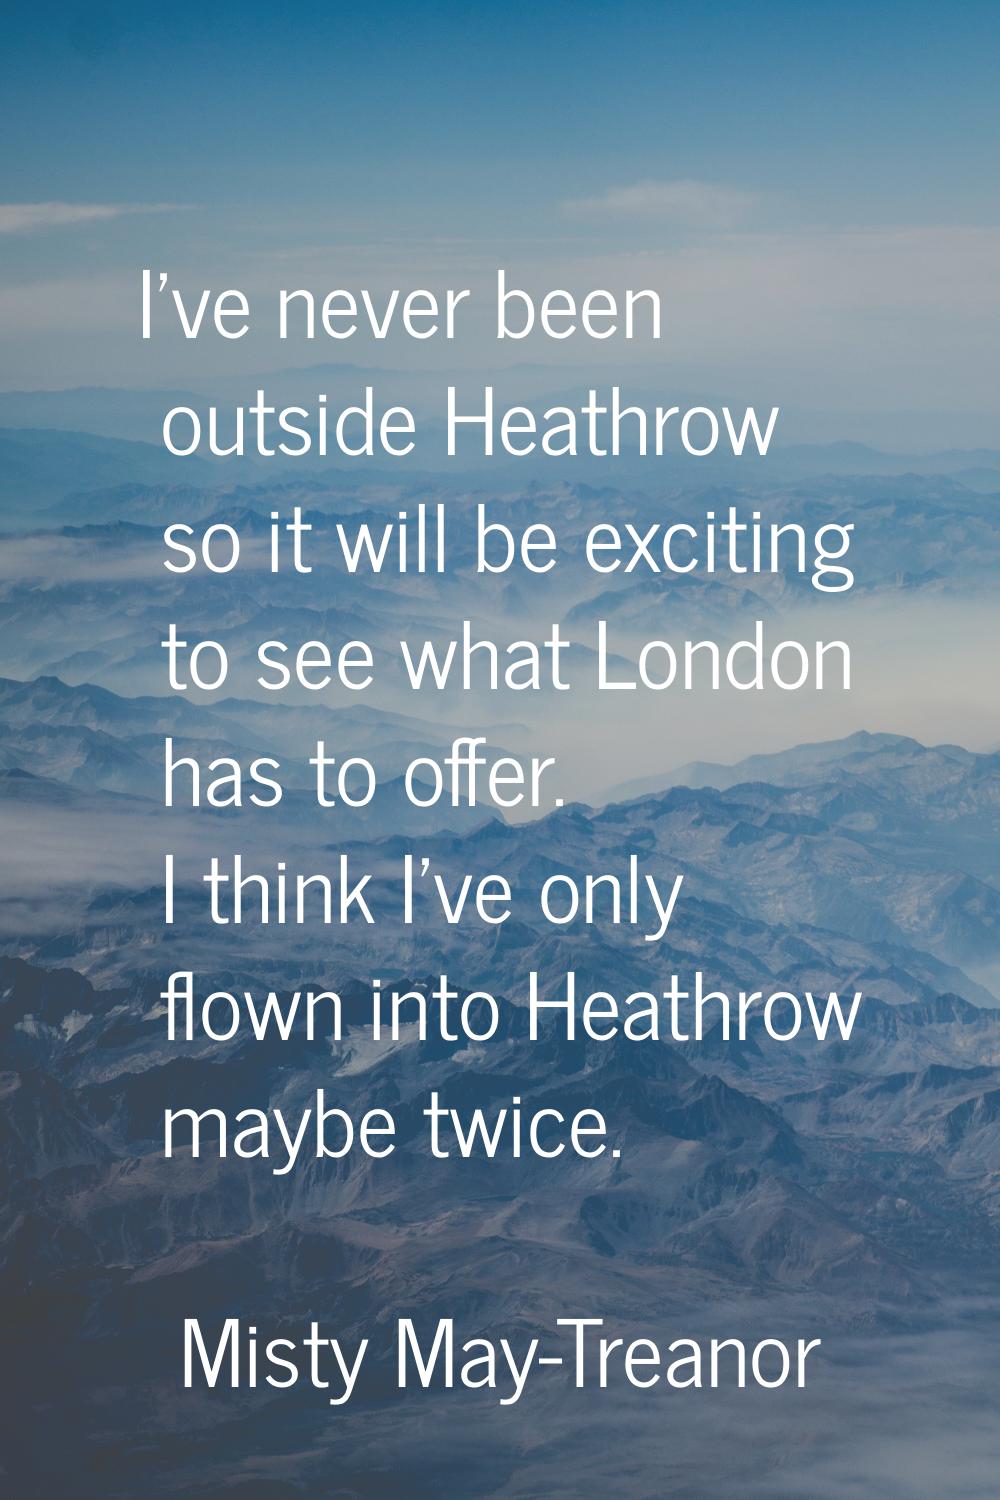 I've never been outside Heathrow so it will be exciting to see what London has to offer. I think I'